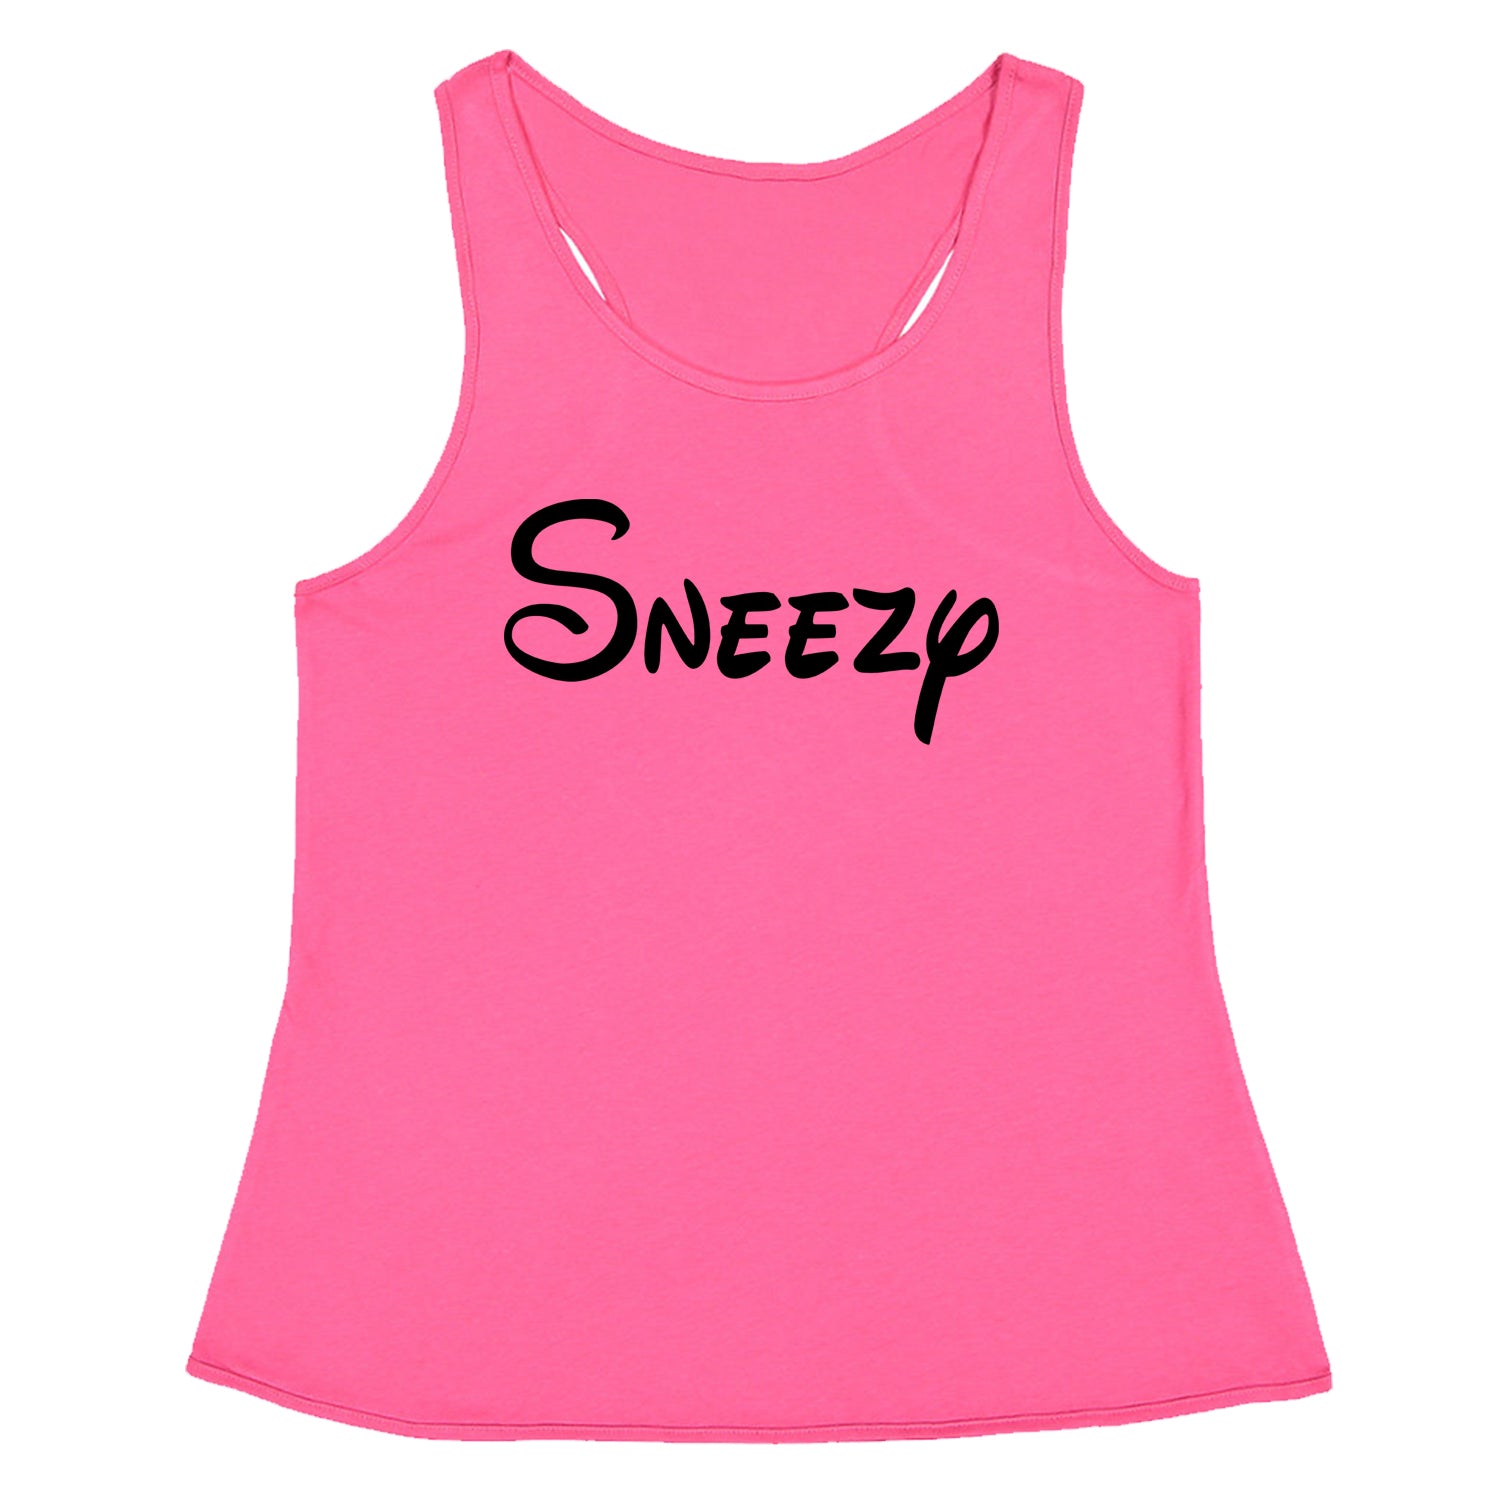 Sneezy - 7 Dwarfs Costume Racerback Tank Top for Women and, costume, dwarfs, group, halloween, matching, seven, snow, the, white by Expression Tees